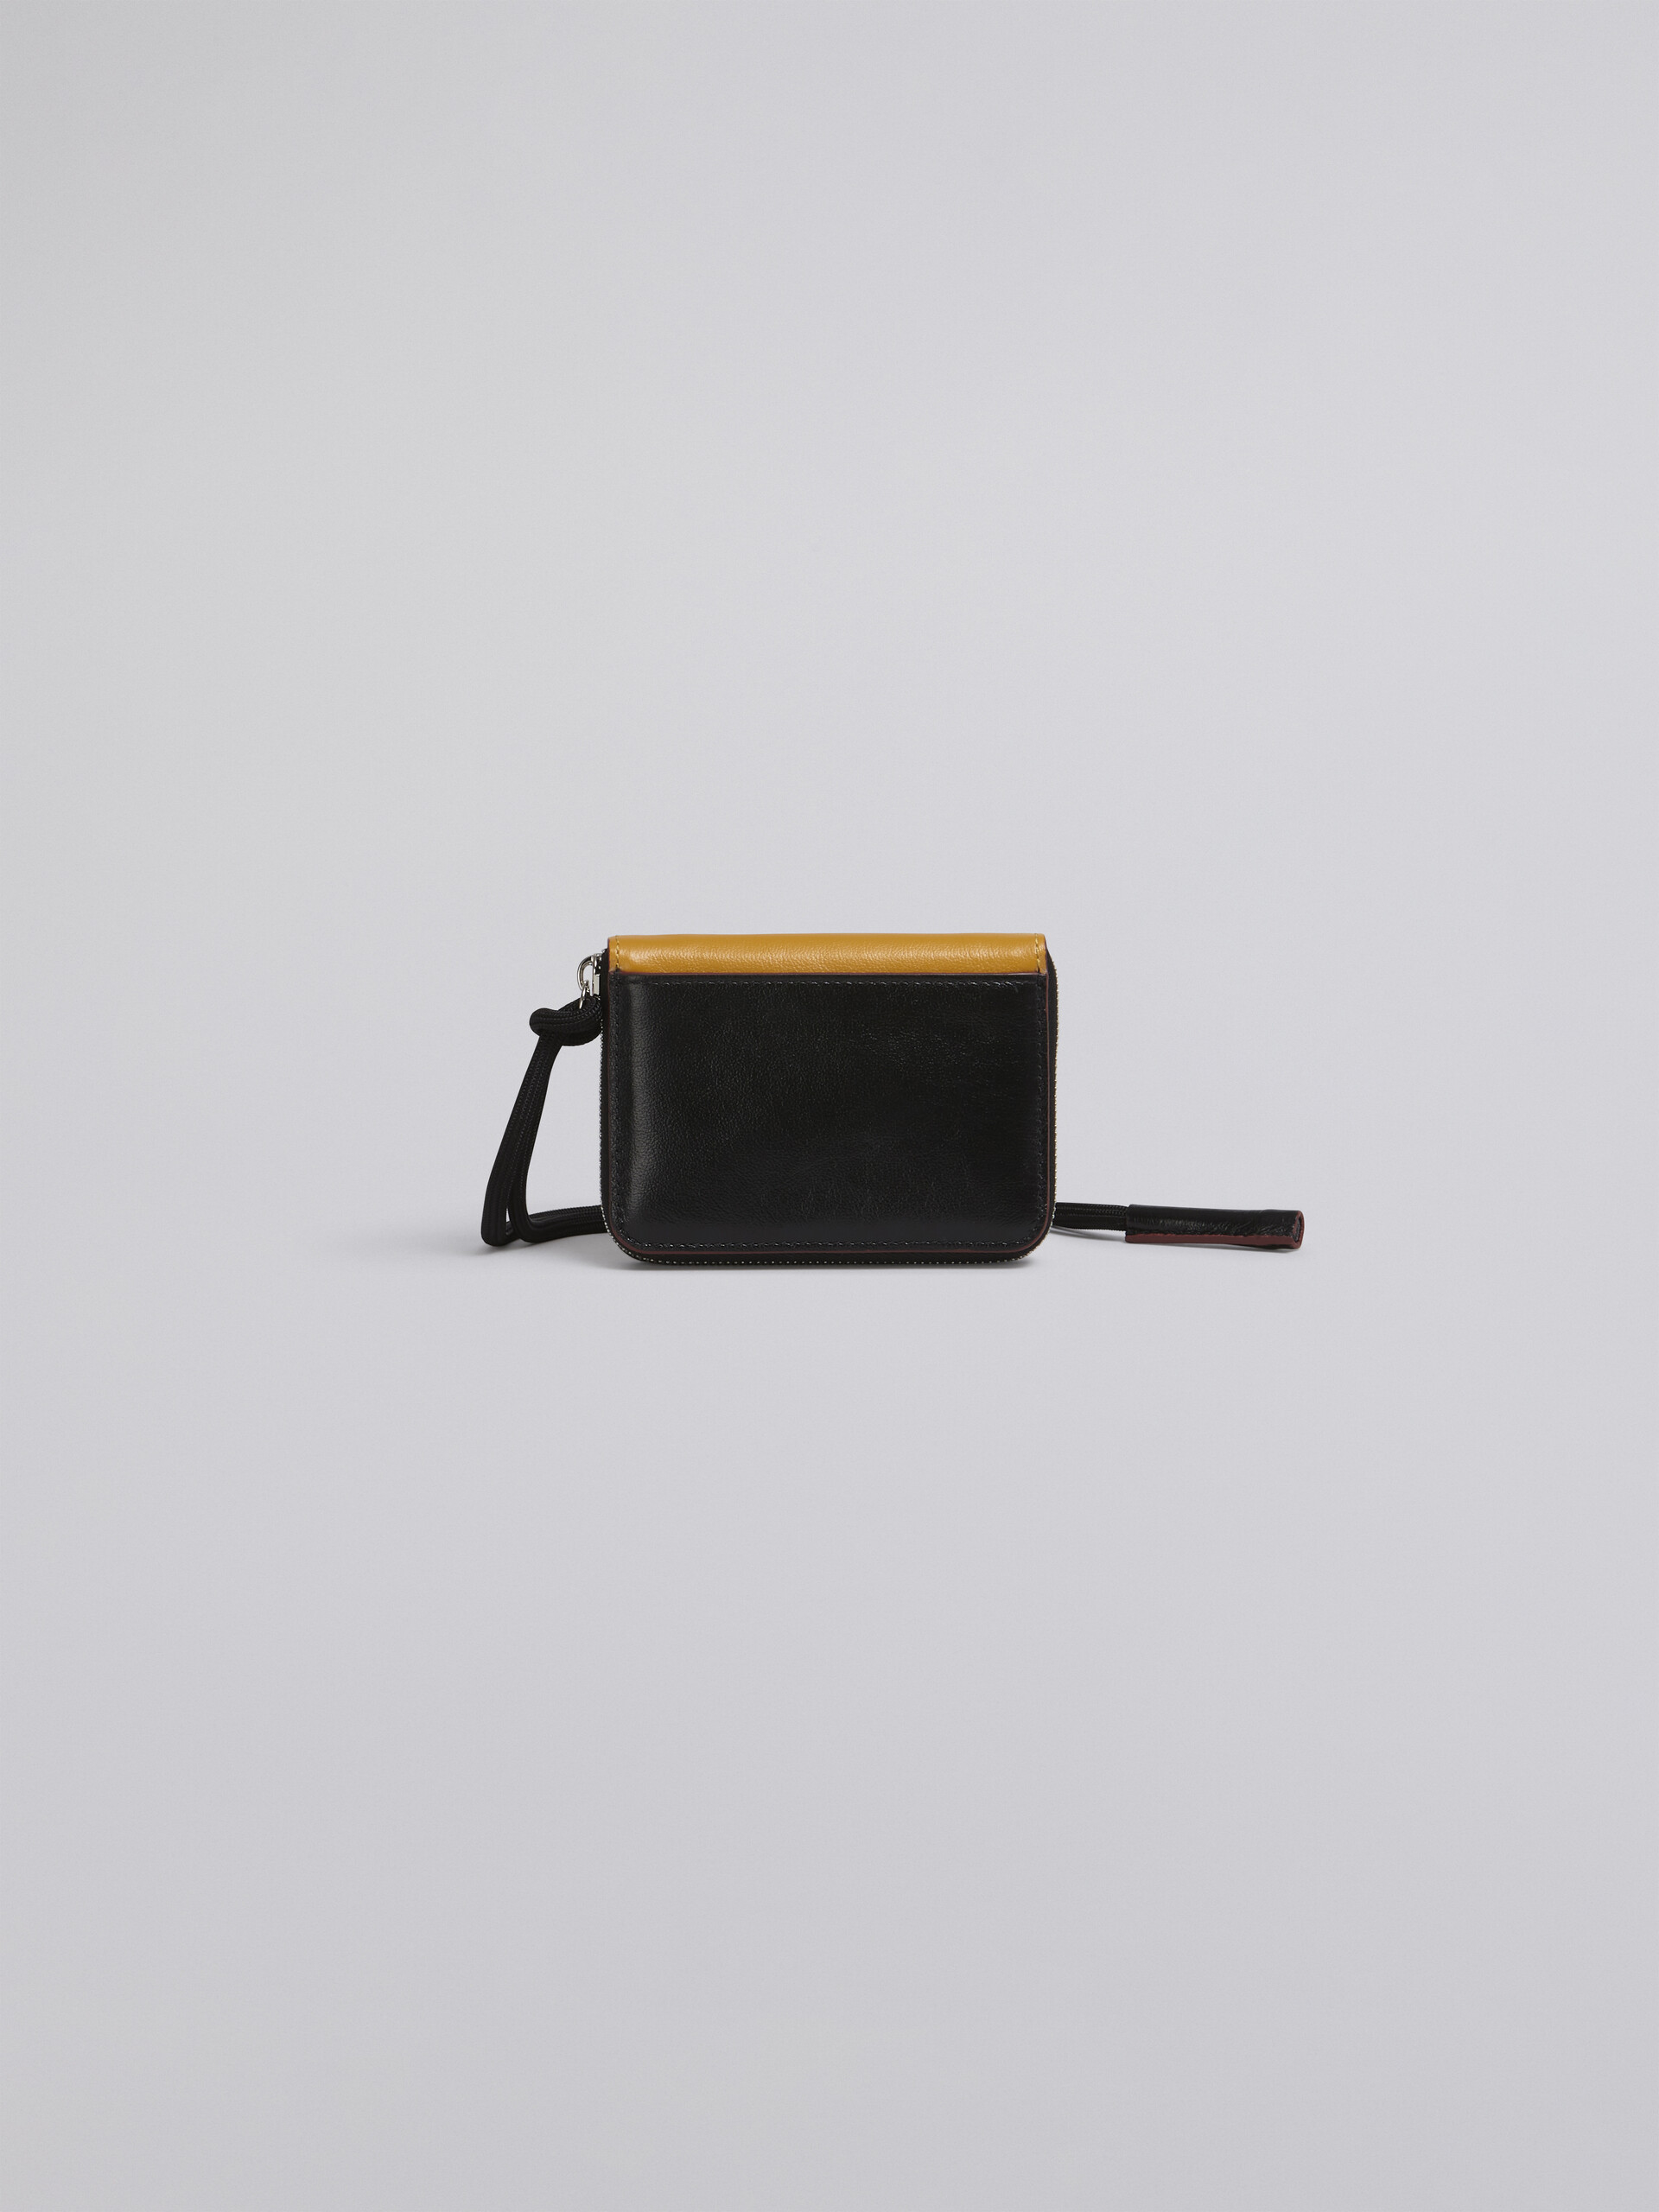 Bi-coloured yellow and black calfskin MUSEO wallet with shoulder strap - Wallets - Image 3